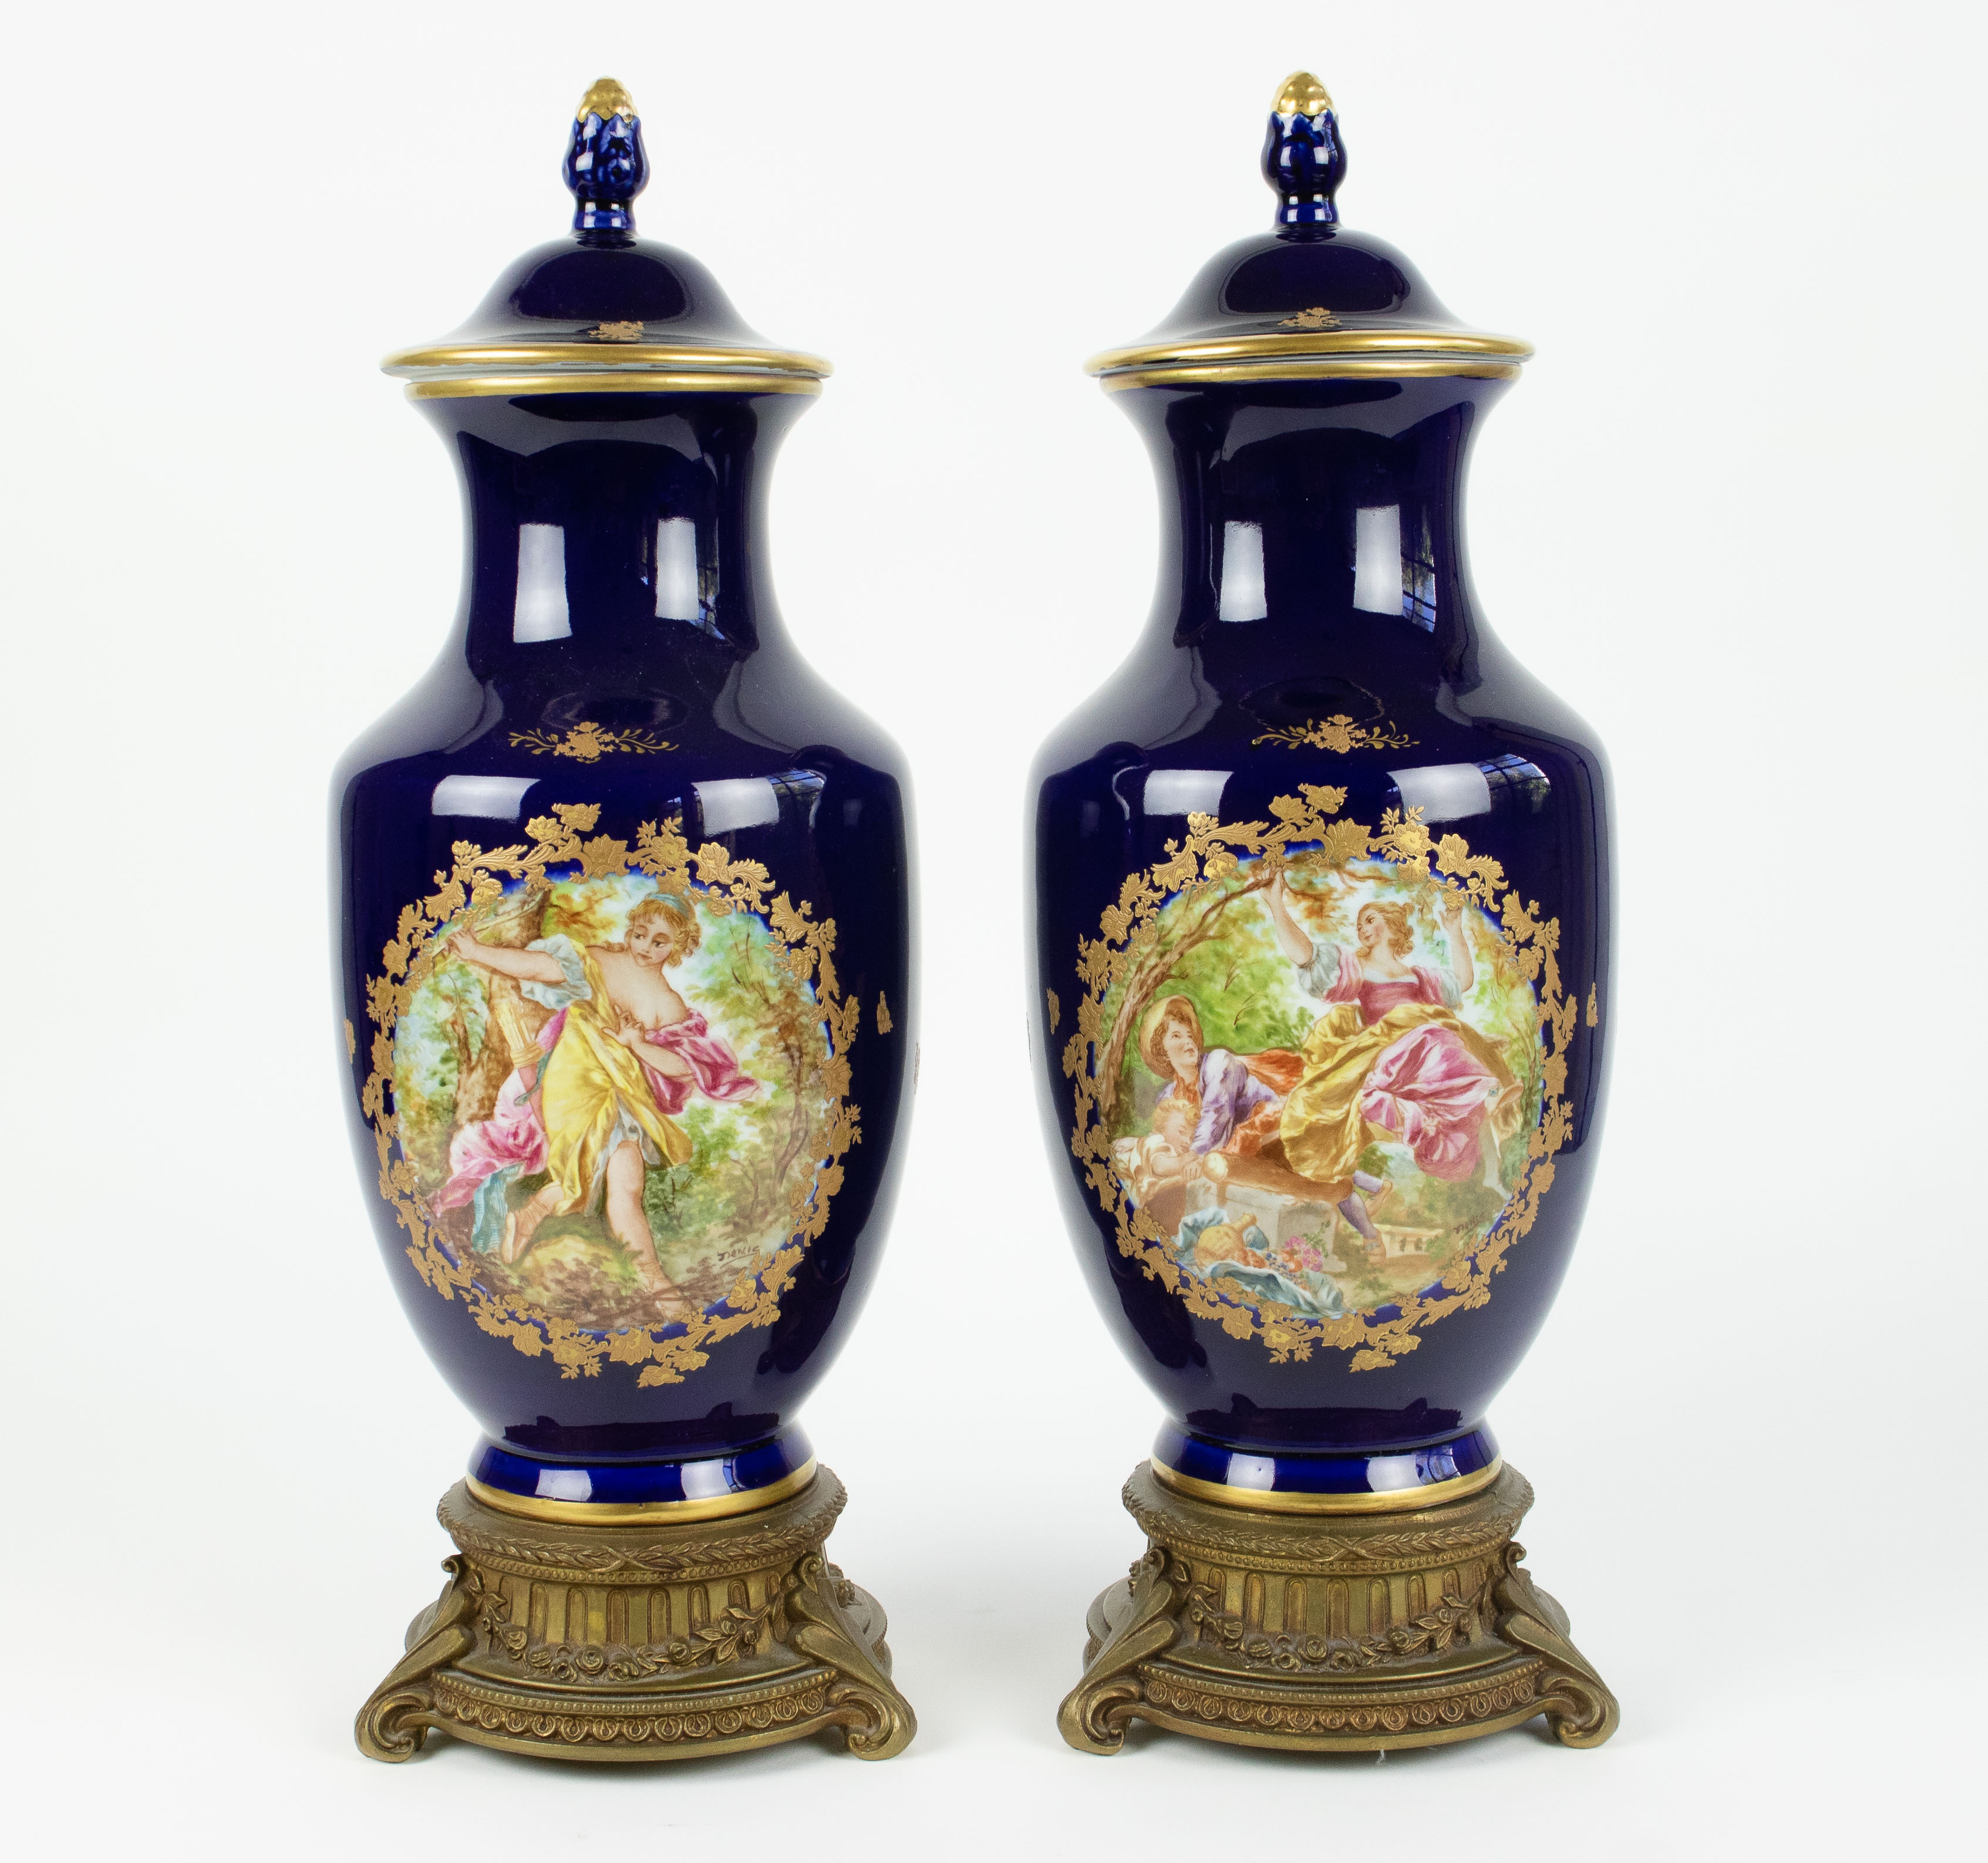 A pair of handpainted Sèvres style vases